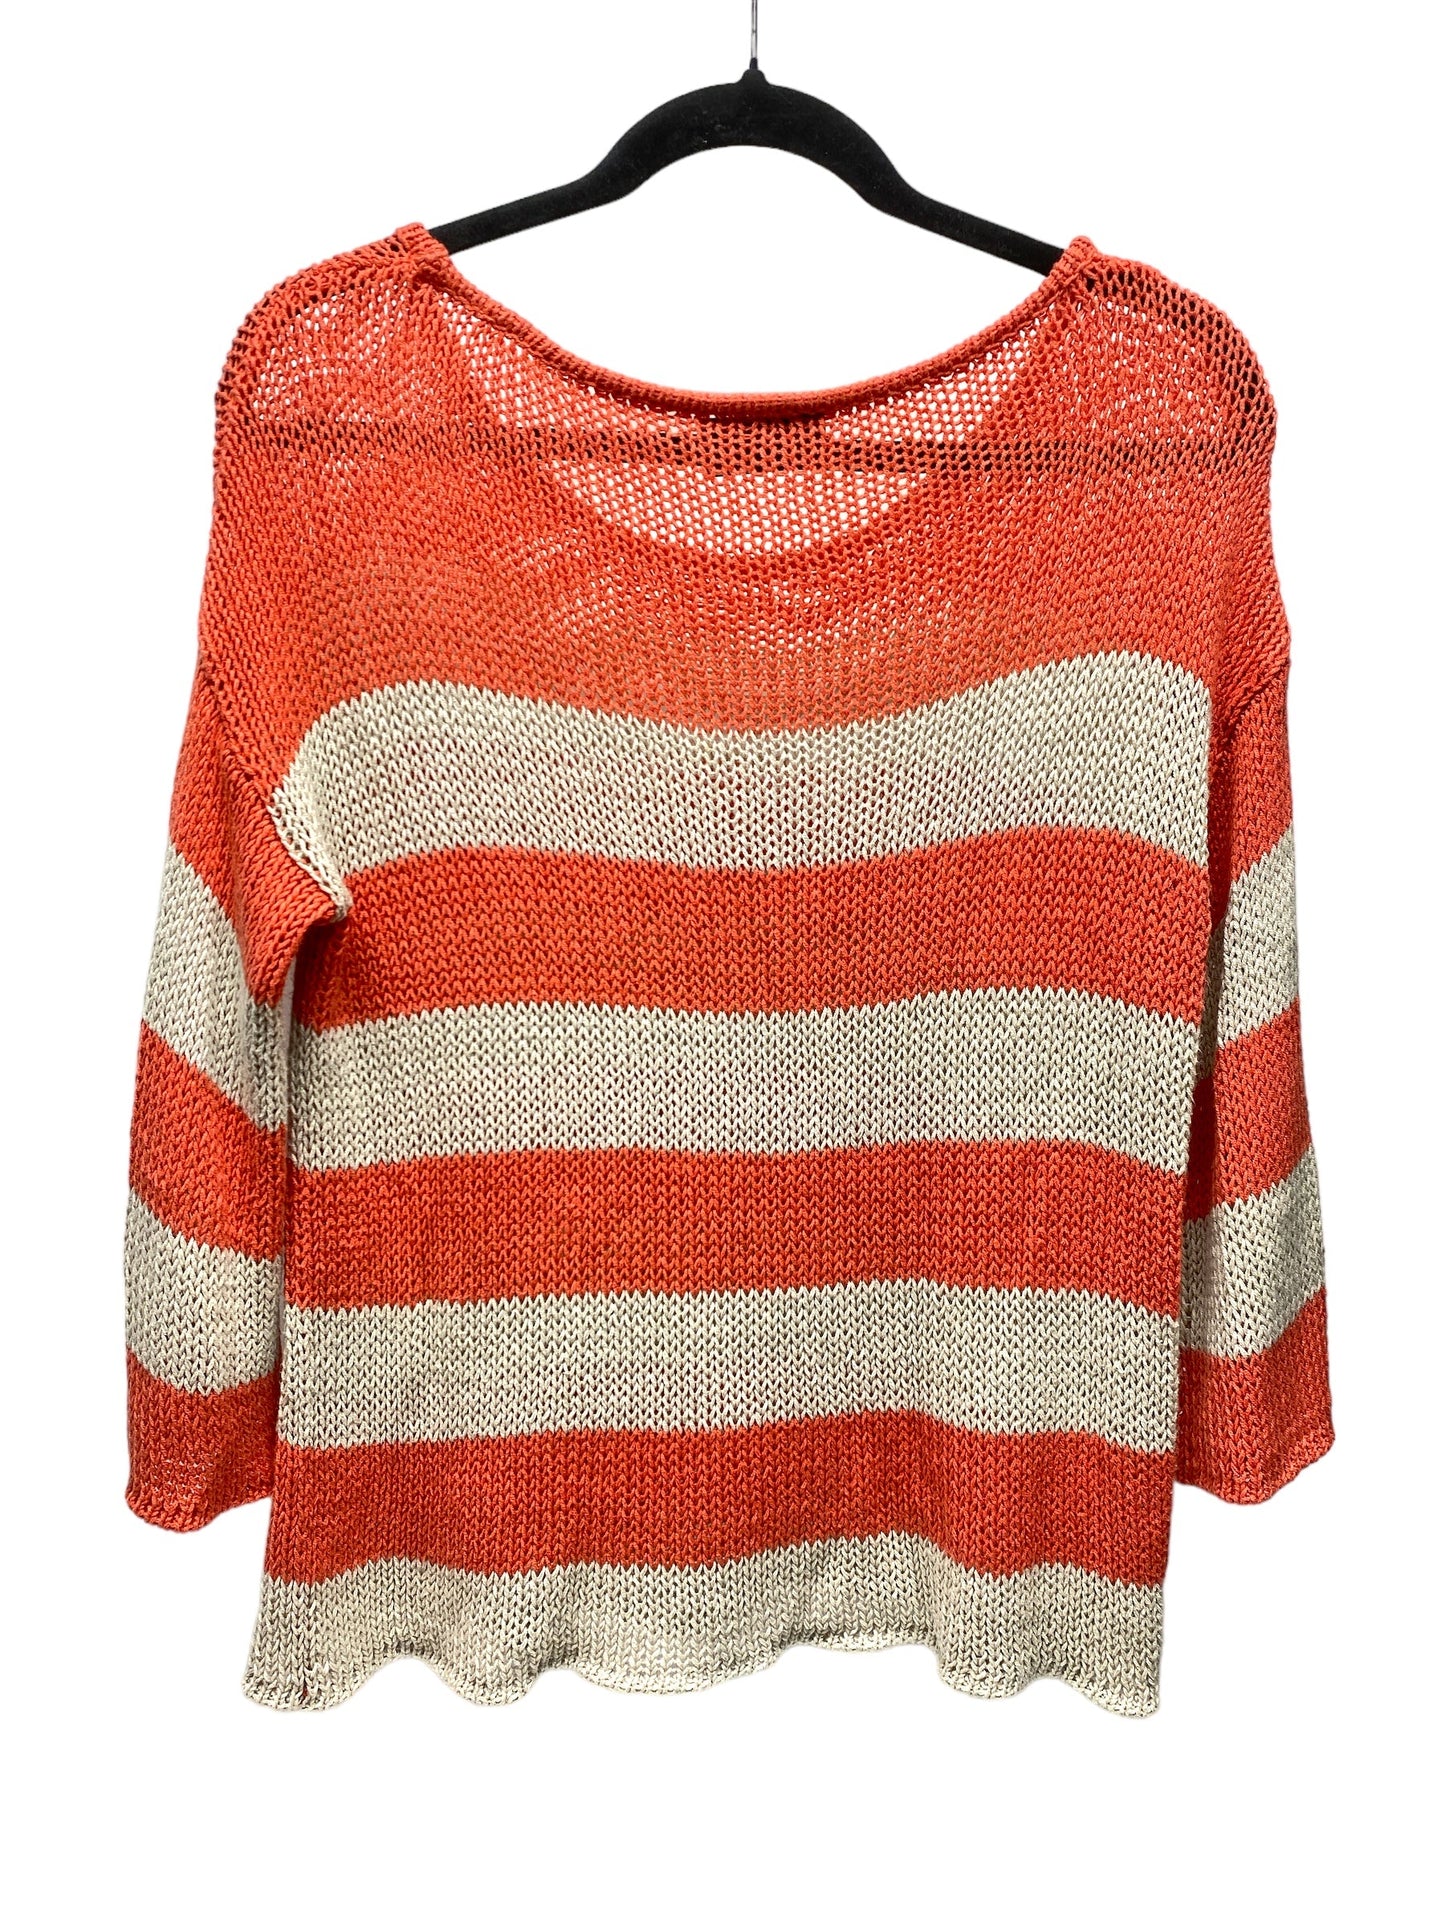 Striped Pattern Sweater Wooden Ships, Size S